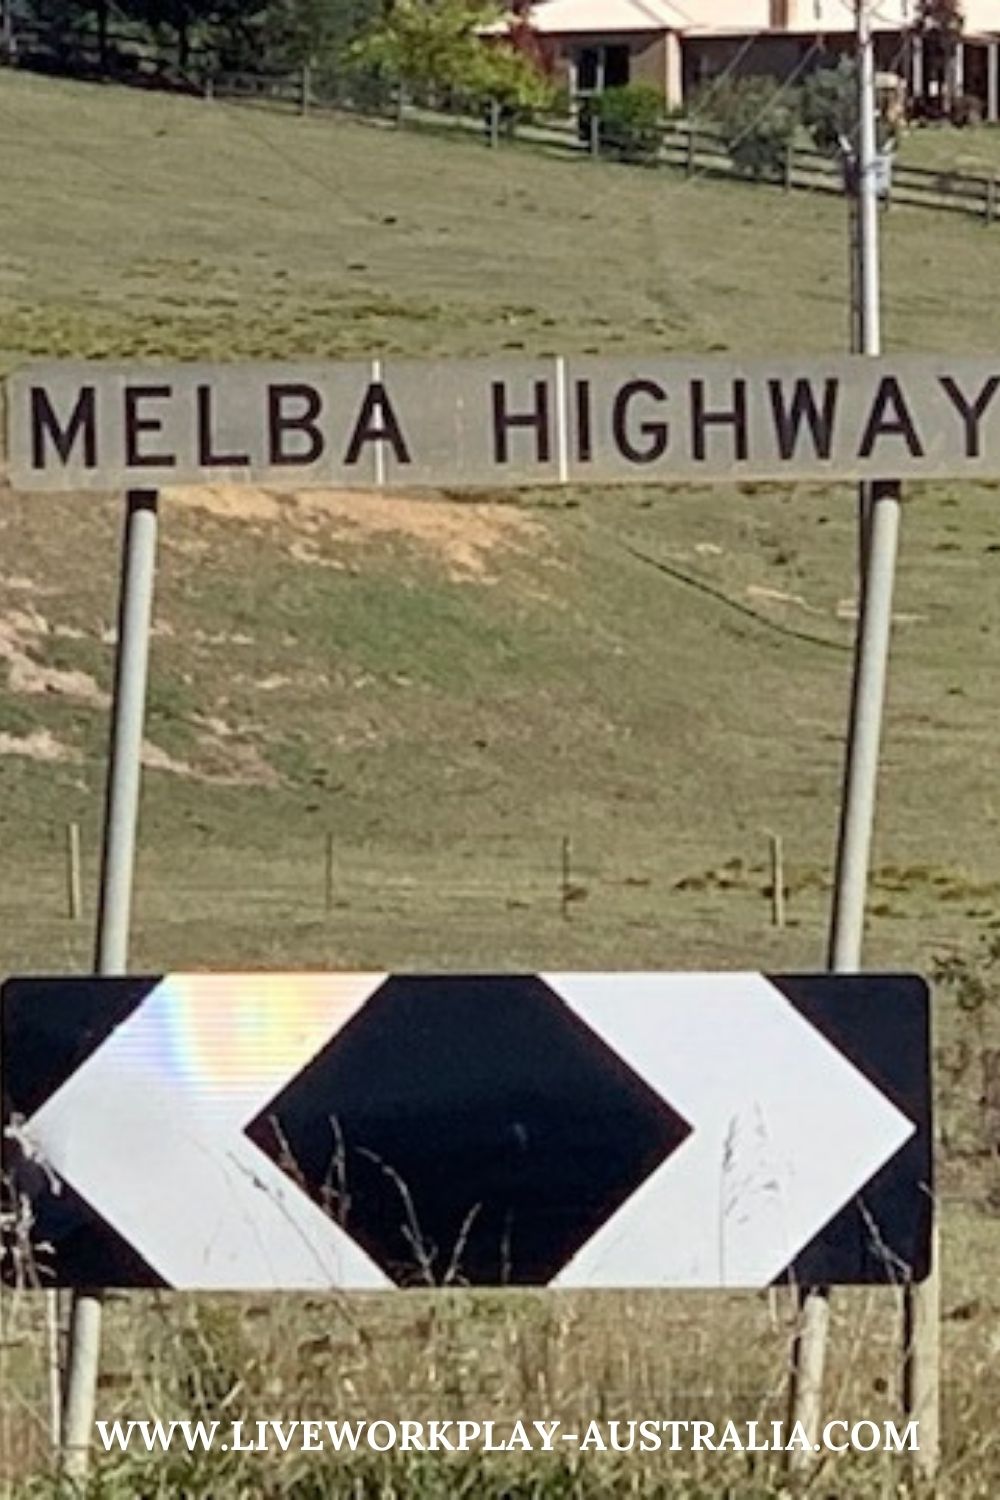 Melba Highway Is A Highway East Of Melbourne Linking Lilydale To Yea.